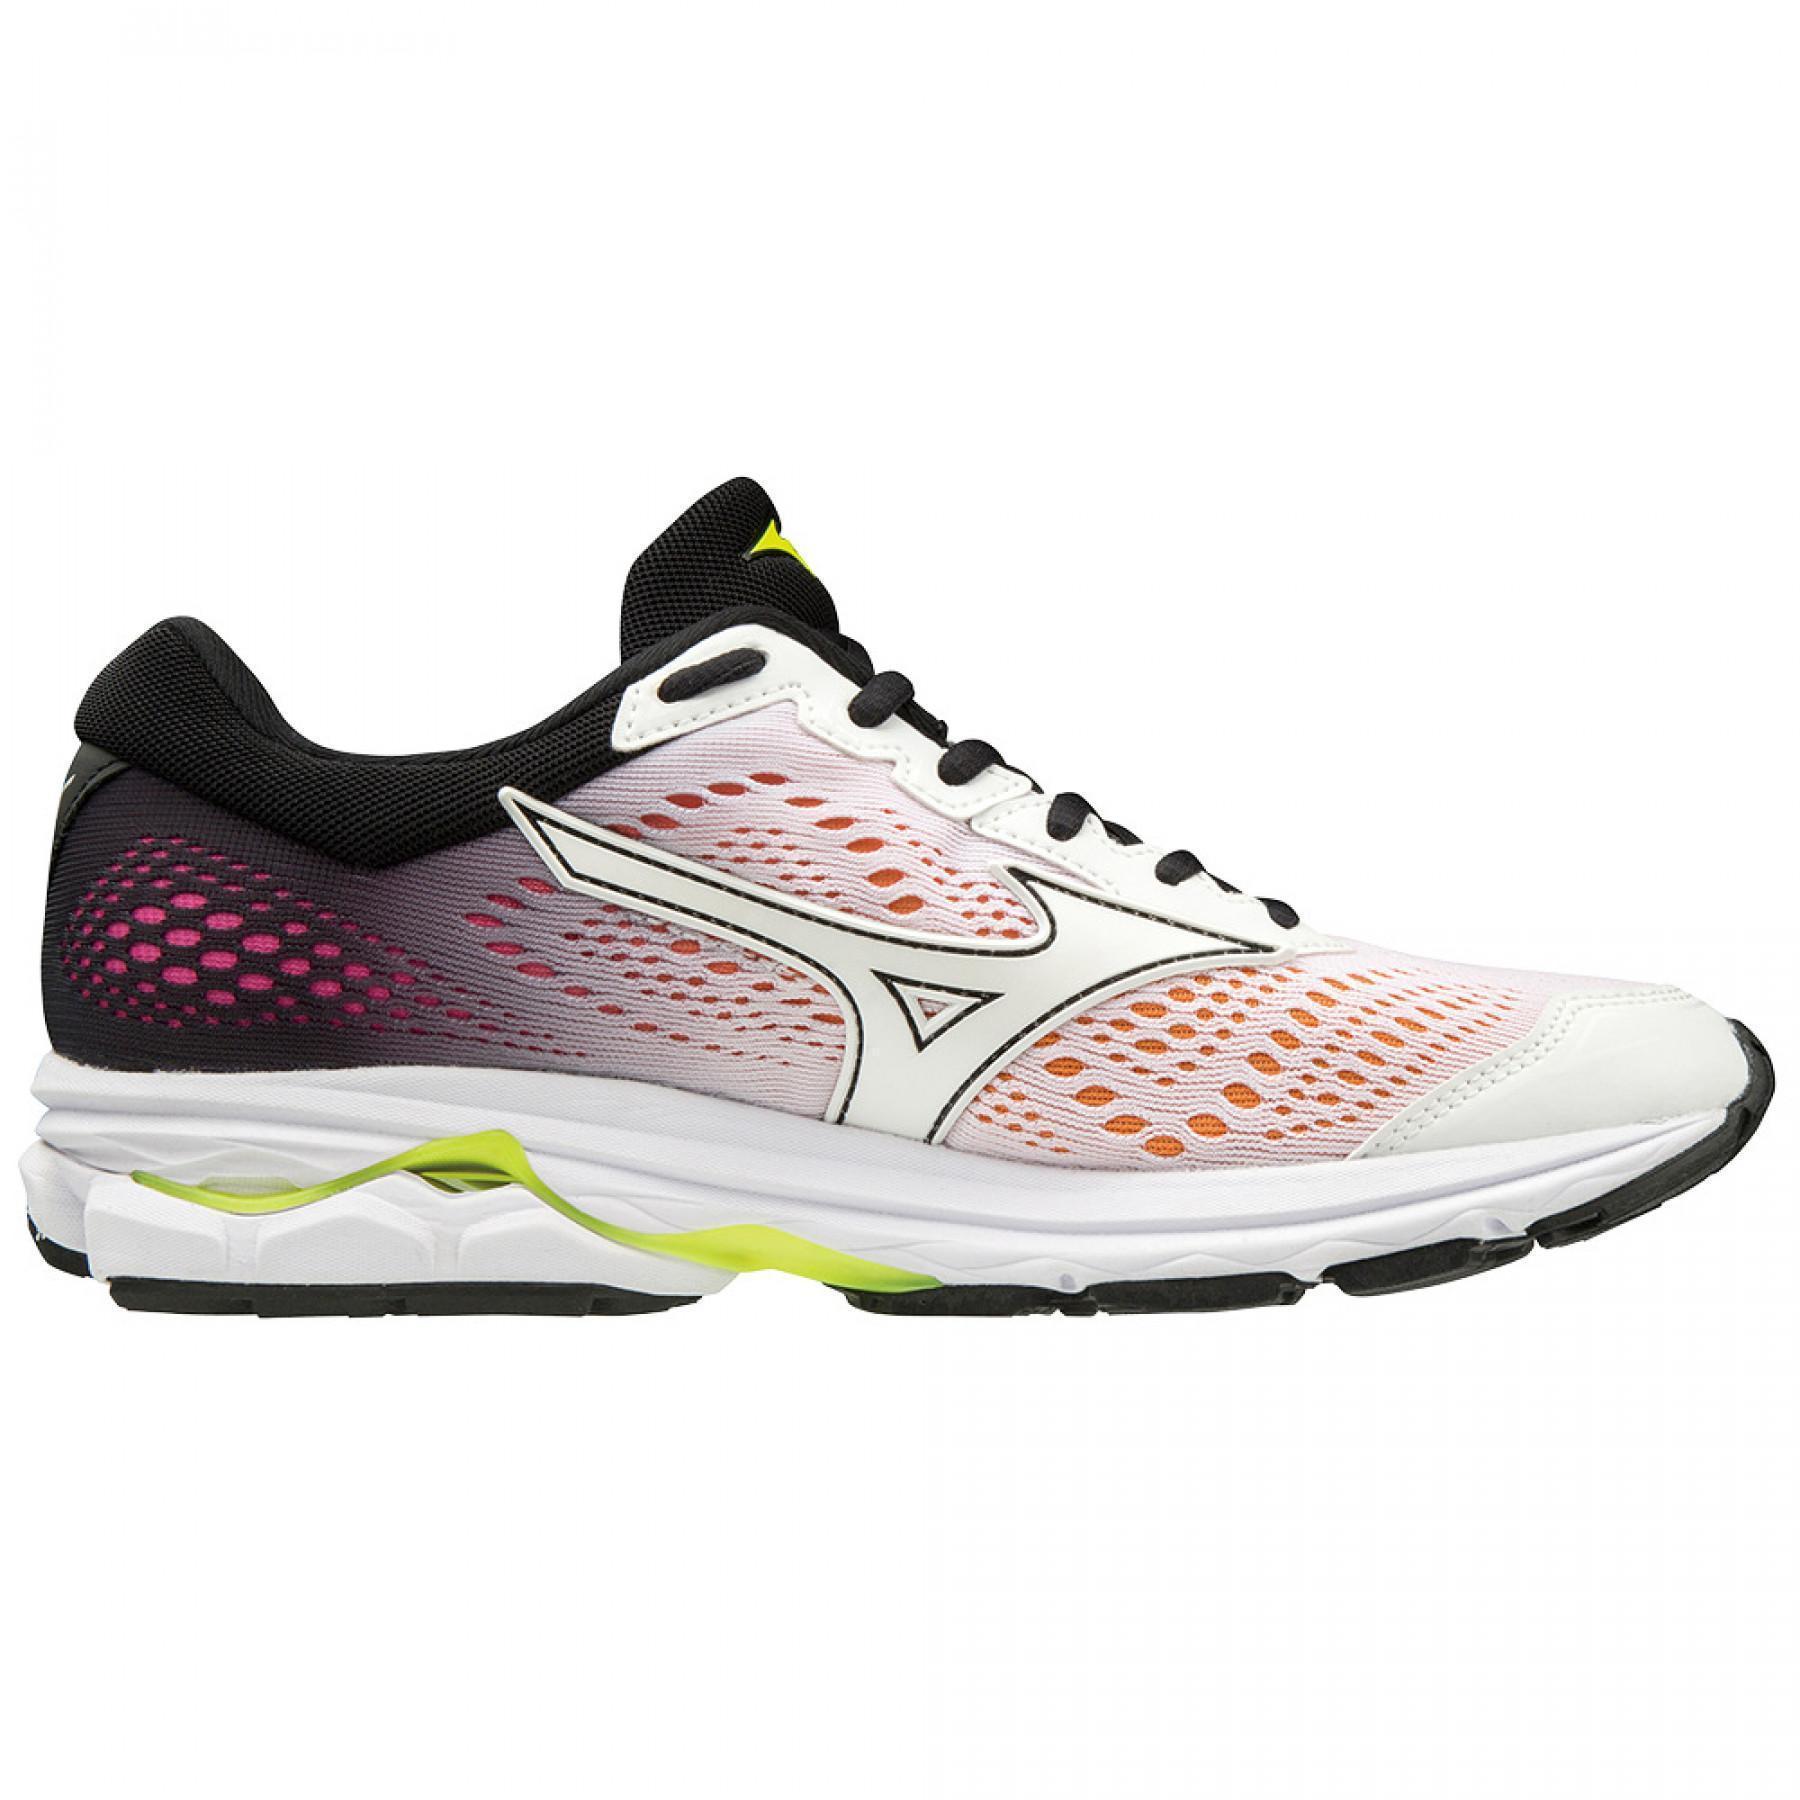 Chaussures femme Mizuno Wave rider 22 colorful